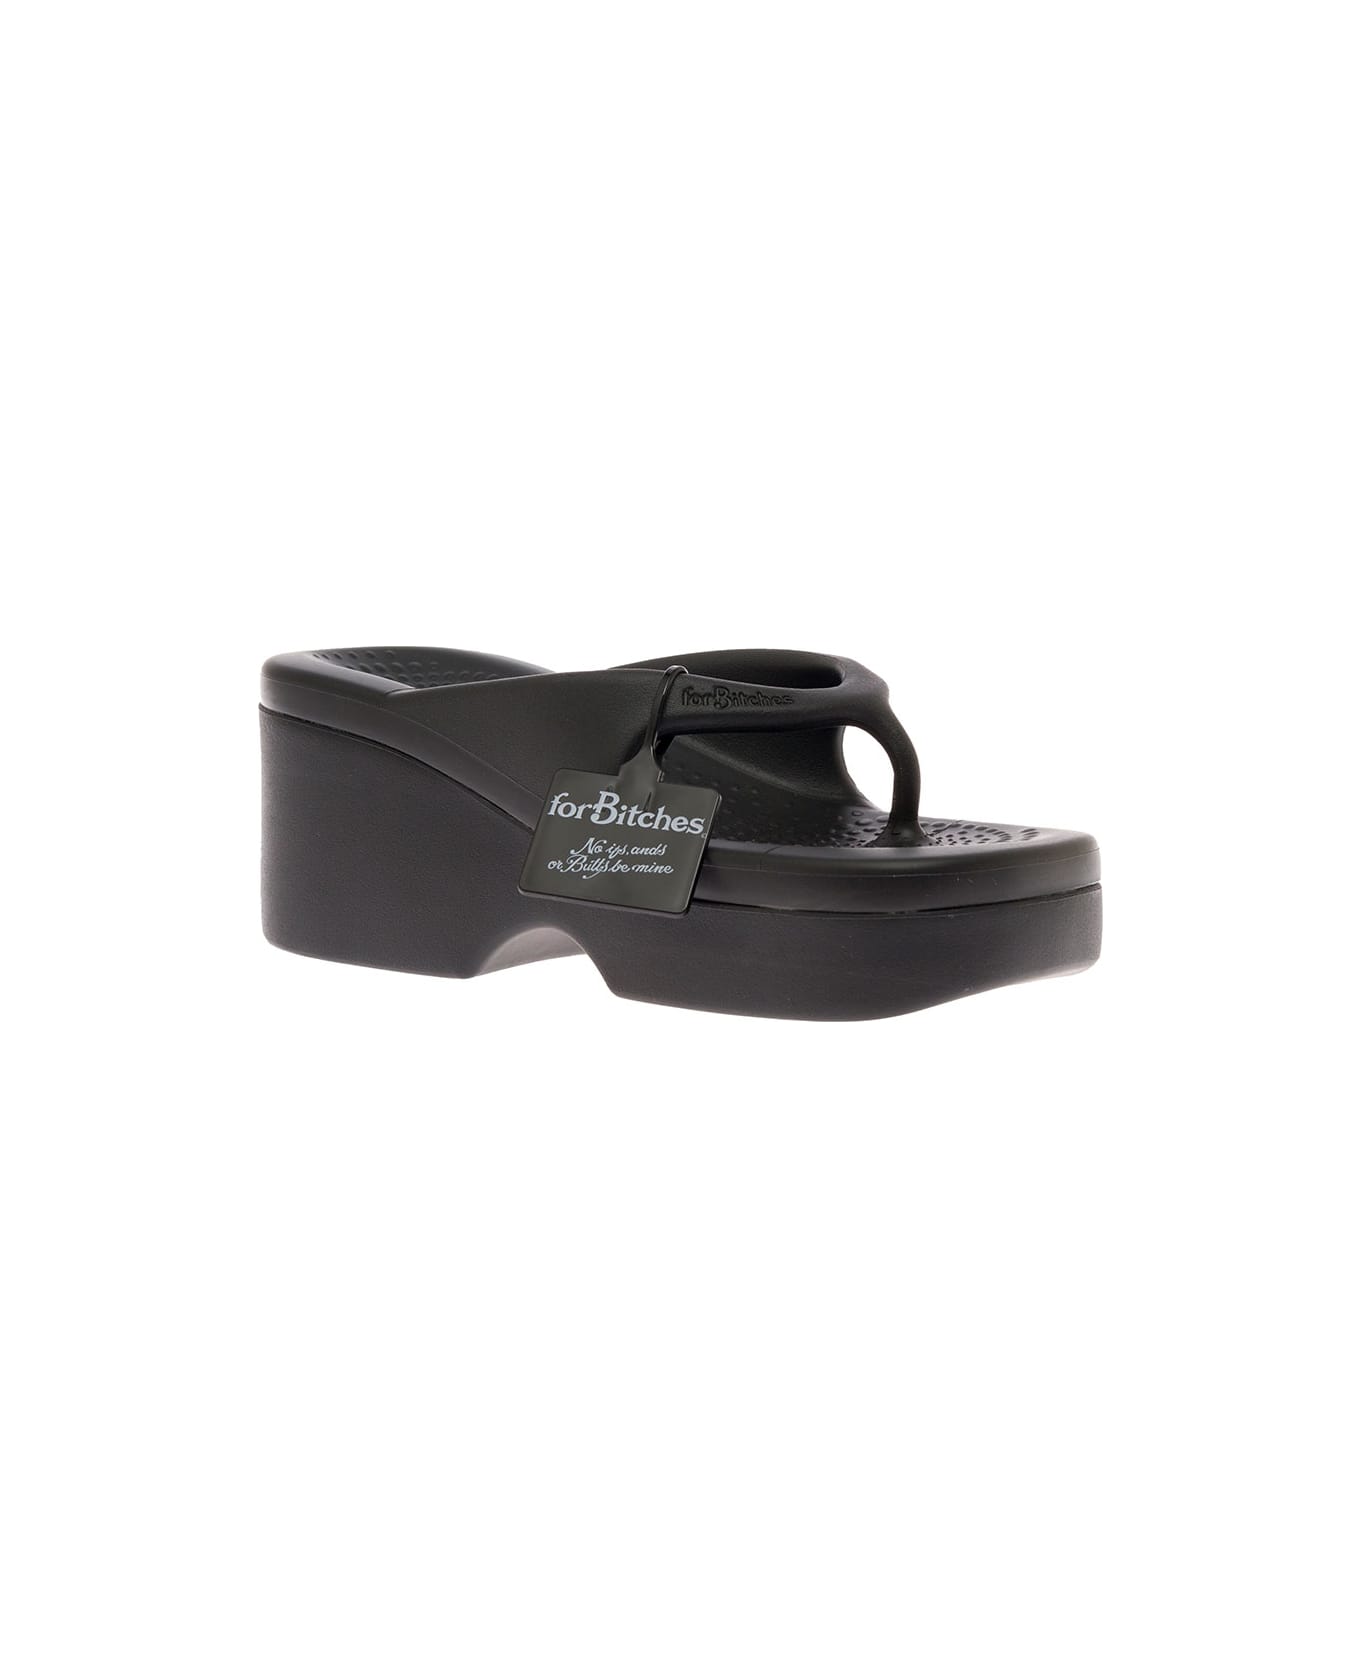 Forbitches Black Peewee Flip-flop Sandals In Eva For Bitches Women - Black